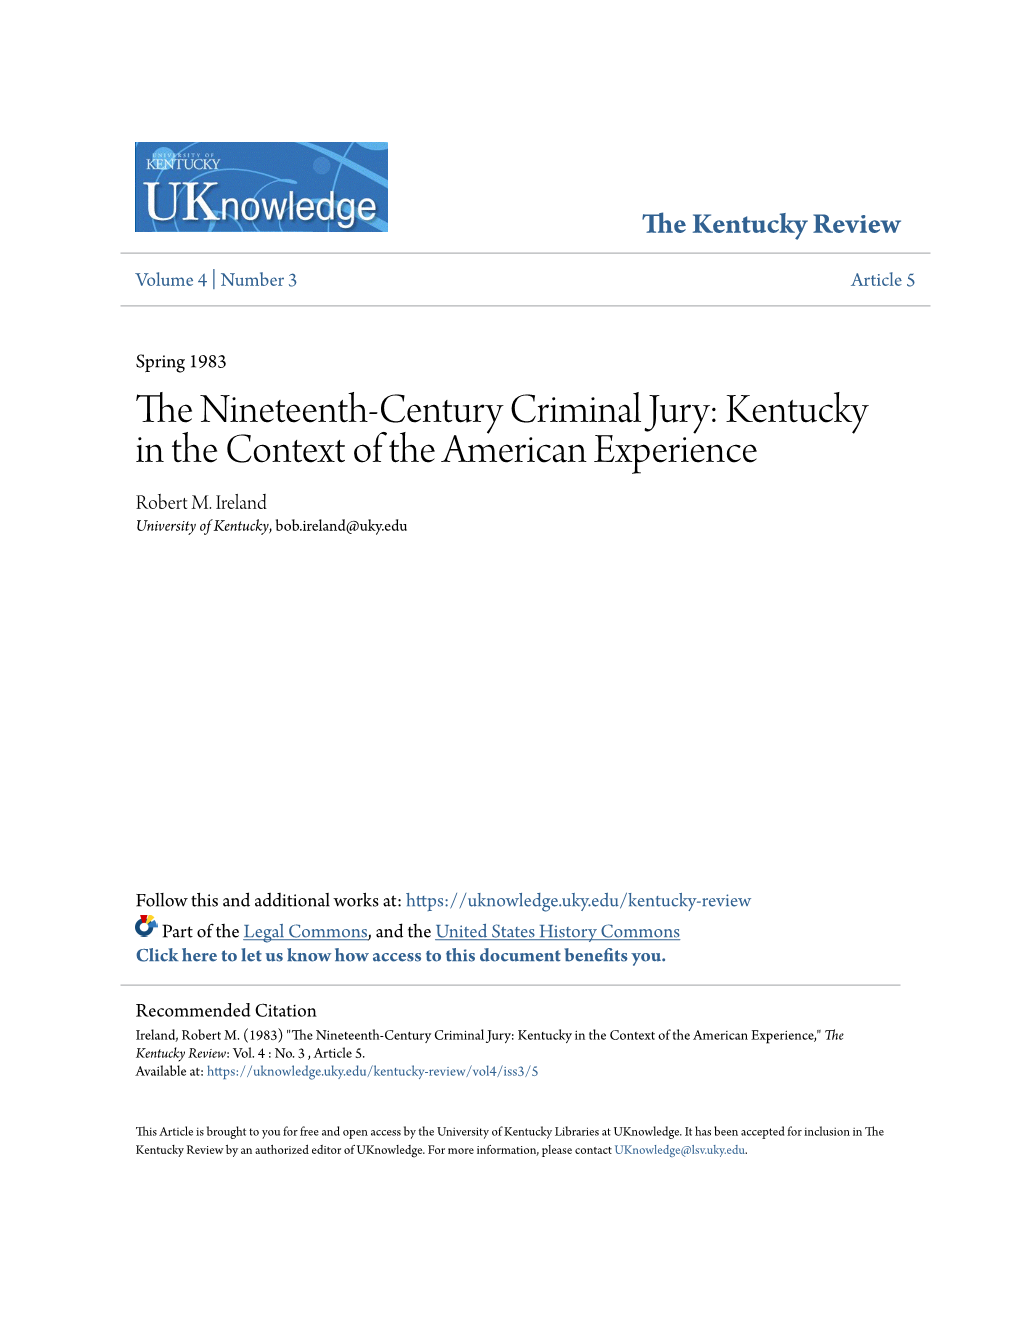 The Nineteenth-Century Criminal Jury: Kentucky in the Context of the American Experience